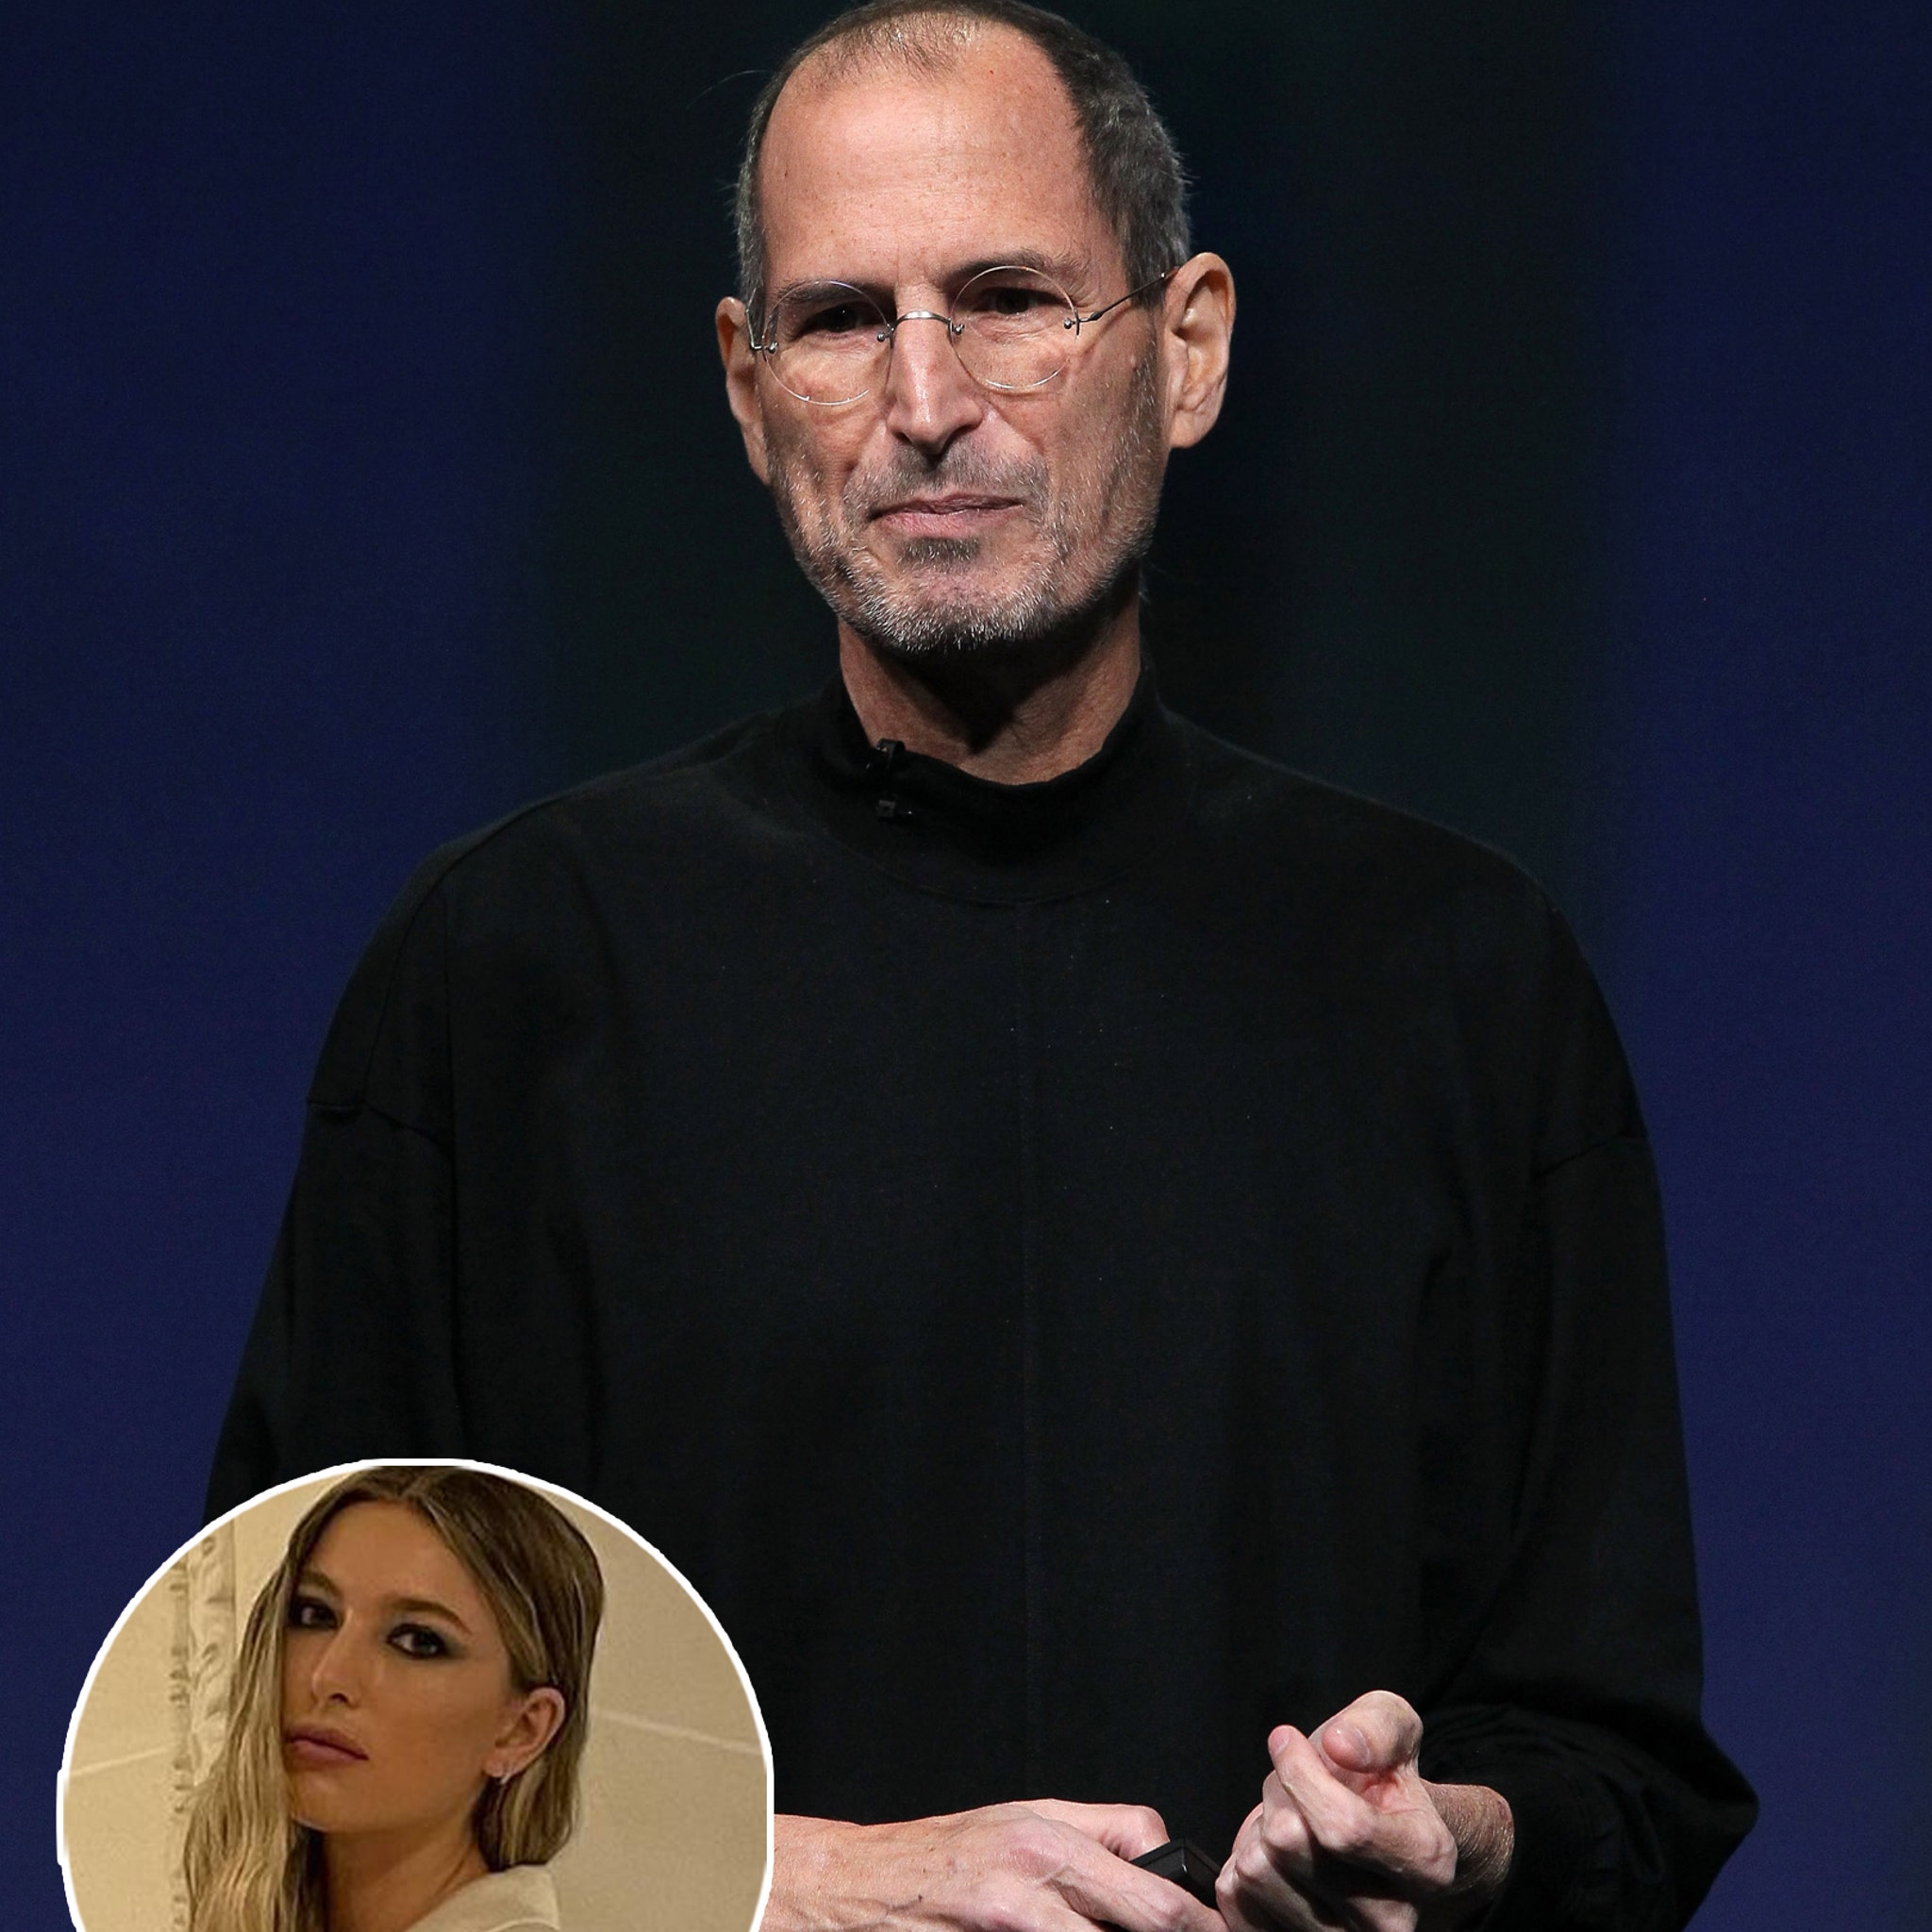 Steve Jobs' daughter Eve Jobs signs with same model agency as Kaia